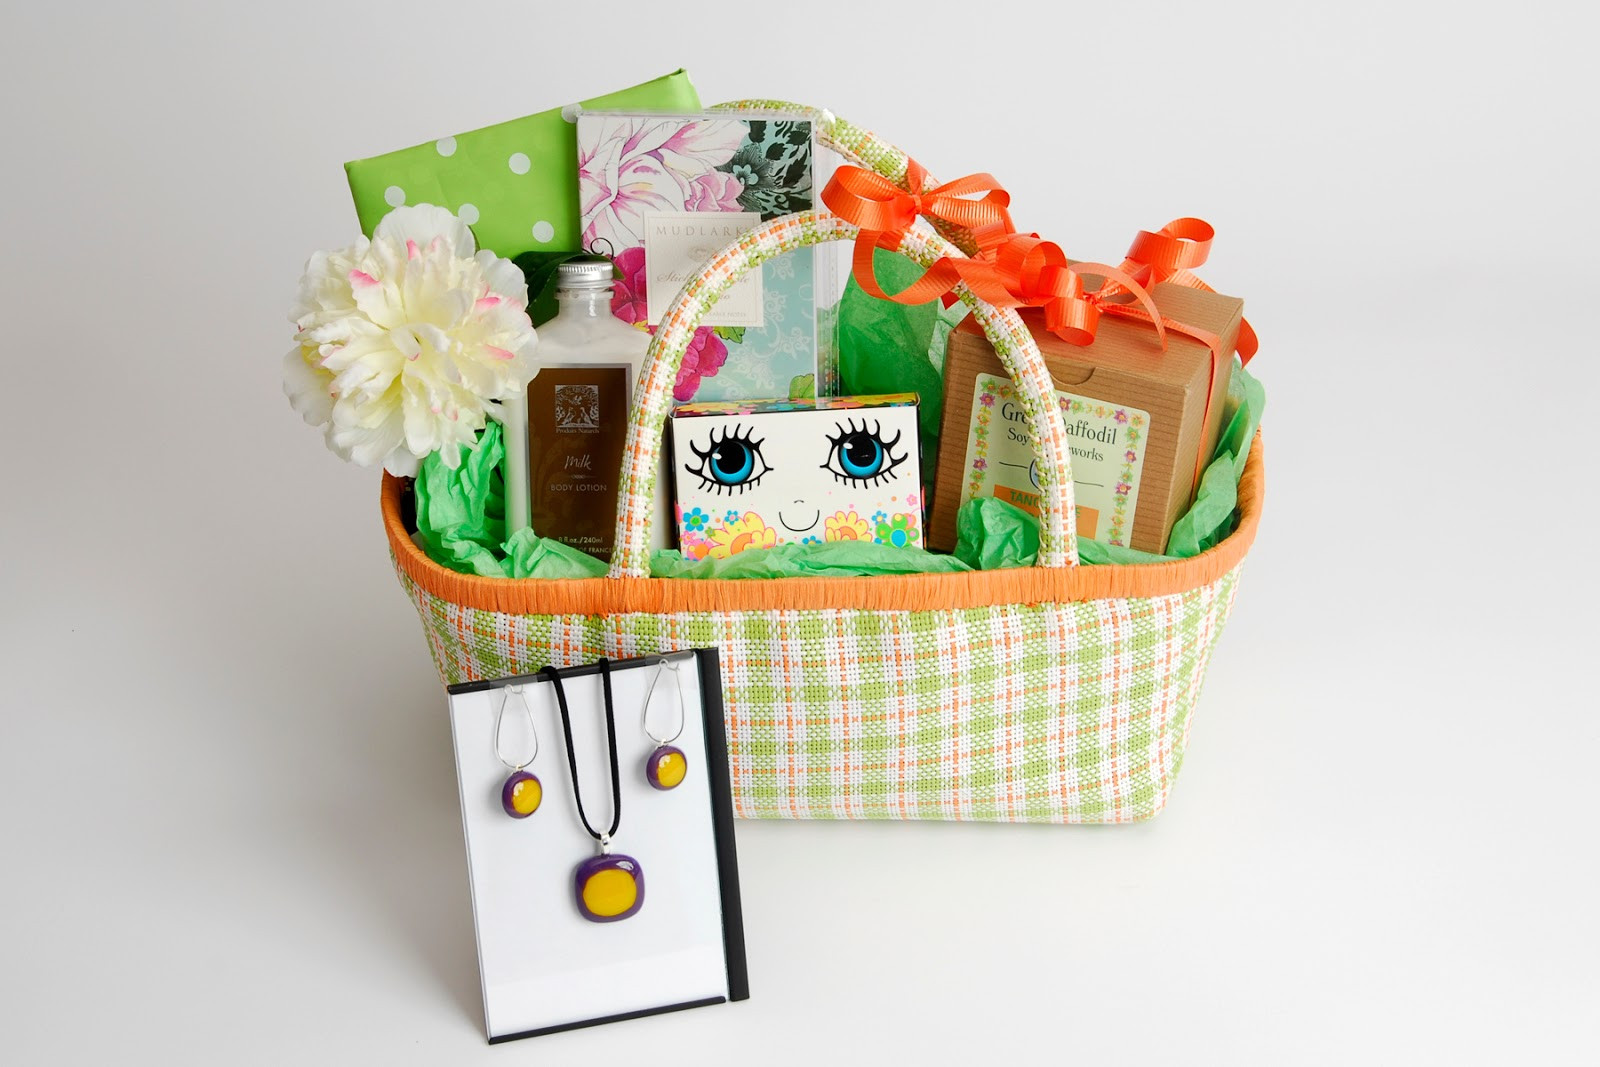 Gift Baskets Ideas For Women
 Thoughtful Presence 5 Great Gift Basket Ideas For Women